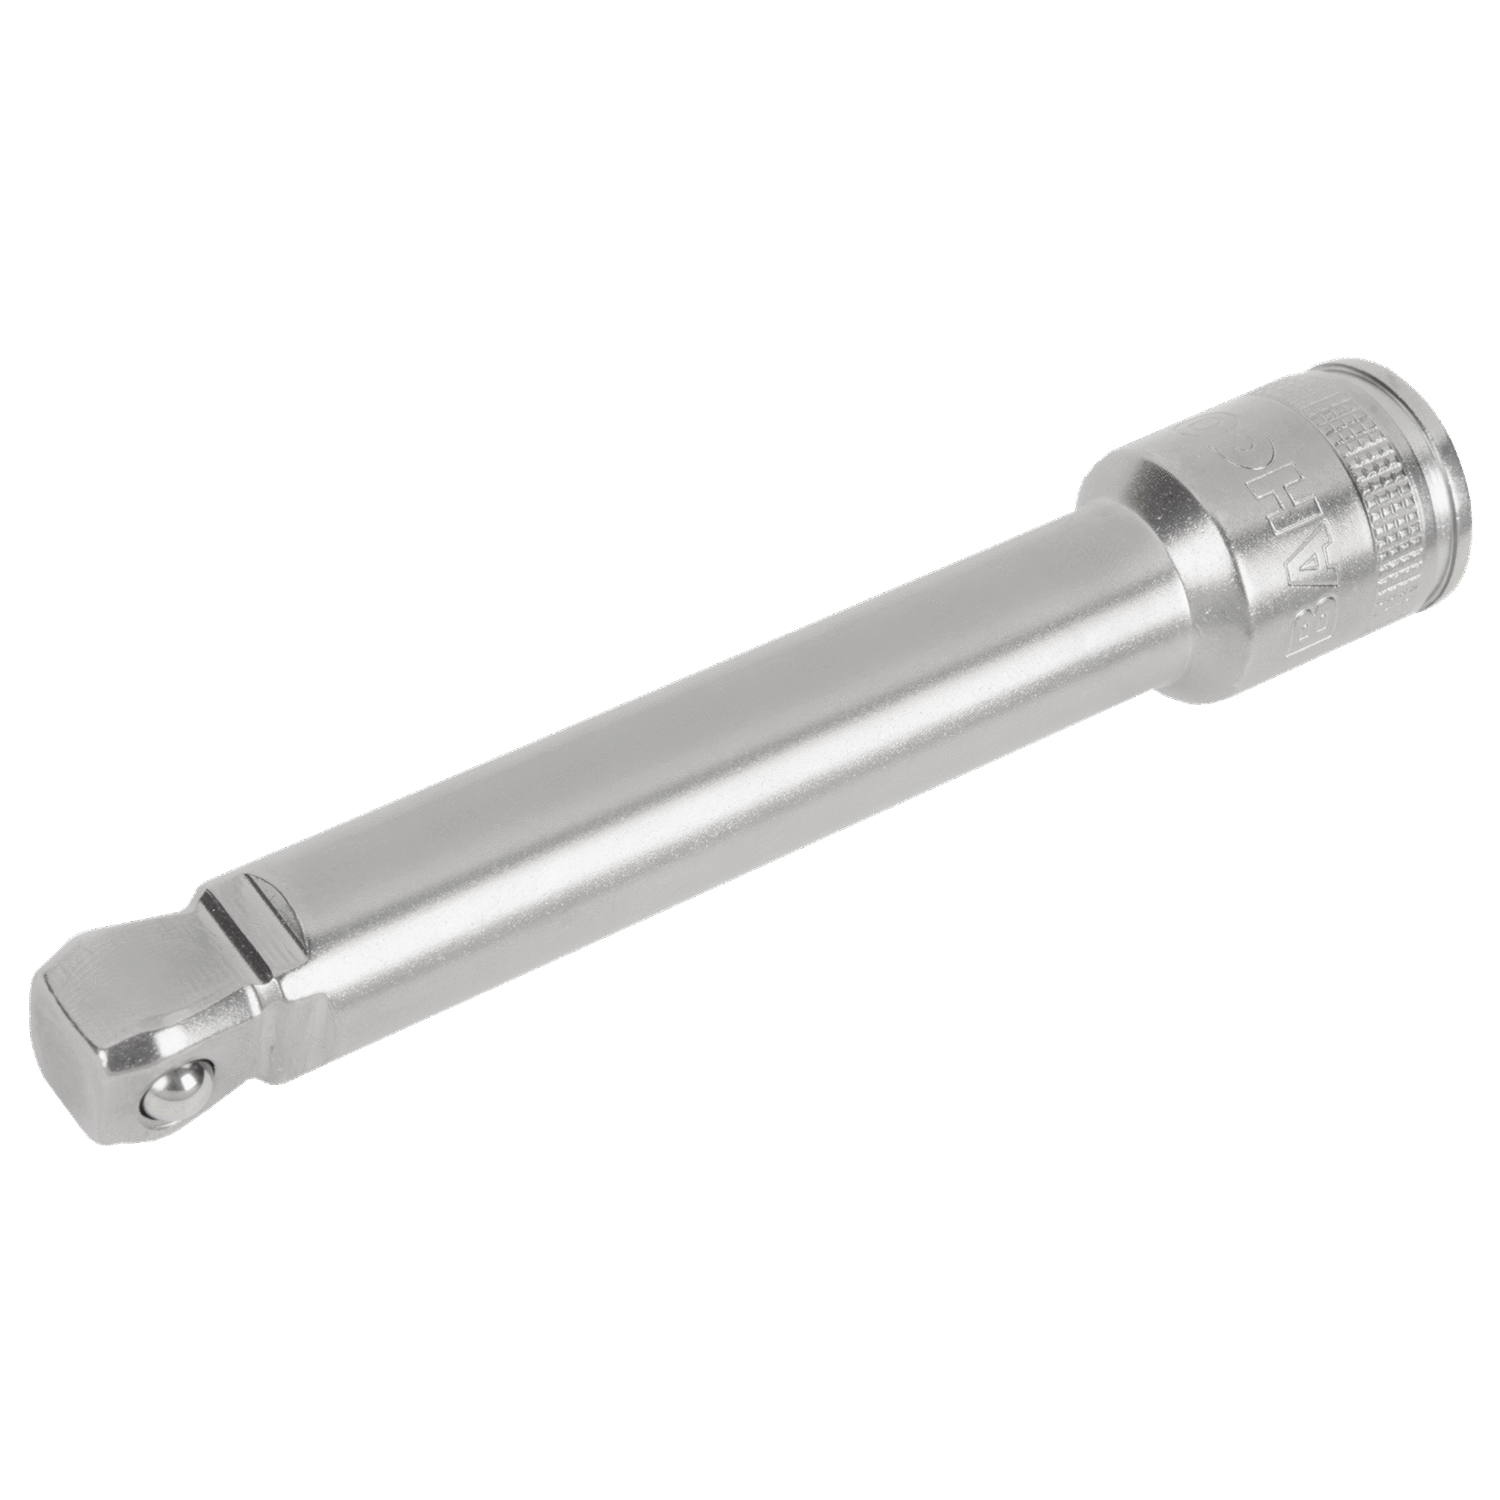 BAHCO 8159-W - 8162-W 1/2" Square Drive Wobbler Extension Bar - Premium Extension Bar from BAHCO - Shop now at Yew Aik.